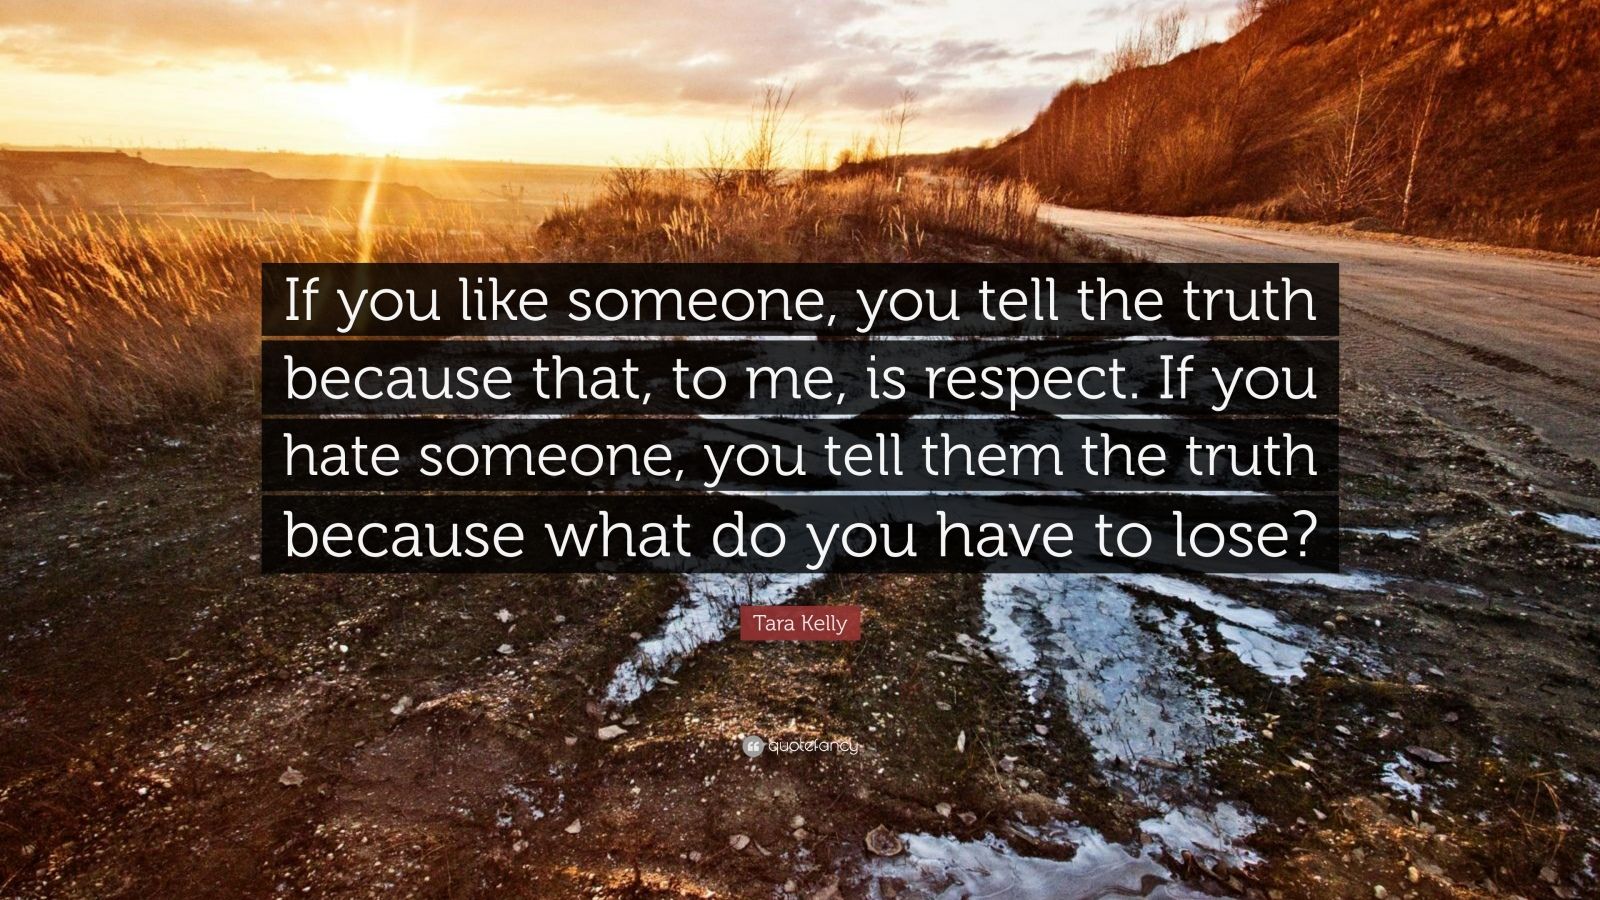 https://quotefancy.com/media/wallpaper/1600x900/1697838-Tara-Kelly-Quote-If-you-like-someone-you-tell-the-truth-because.jpg